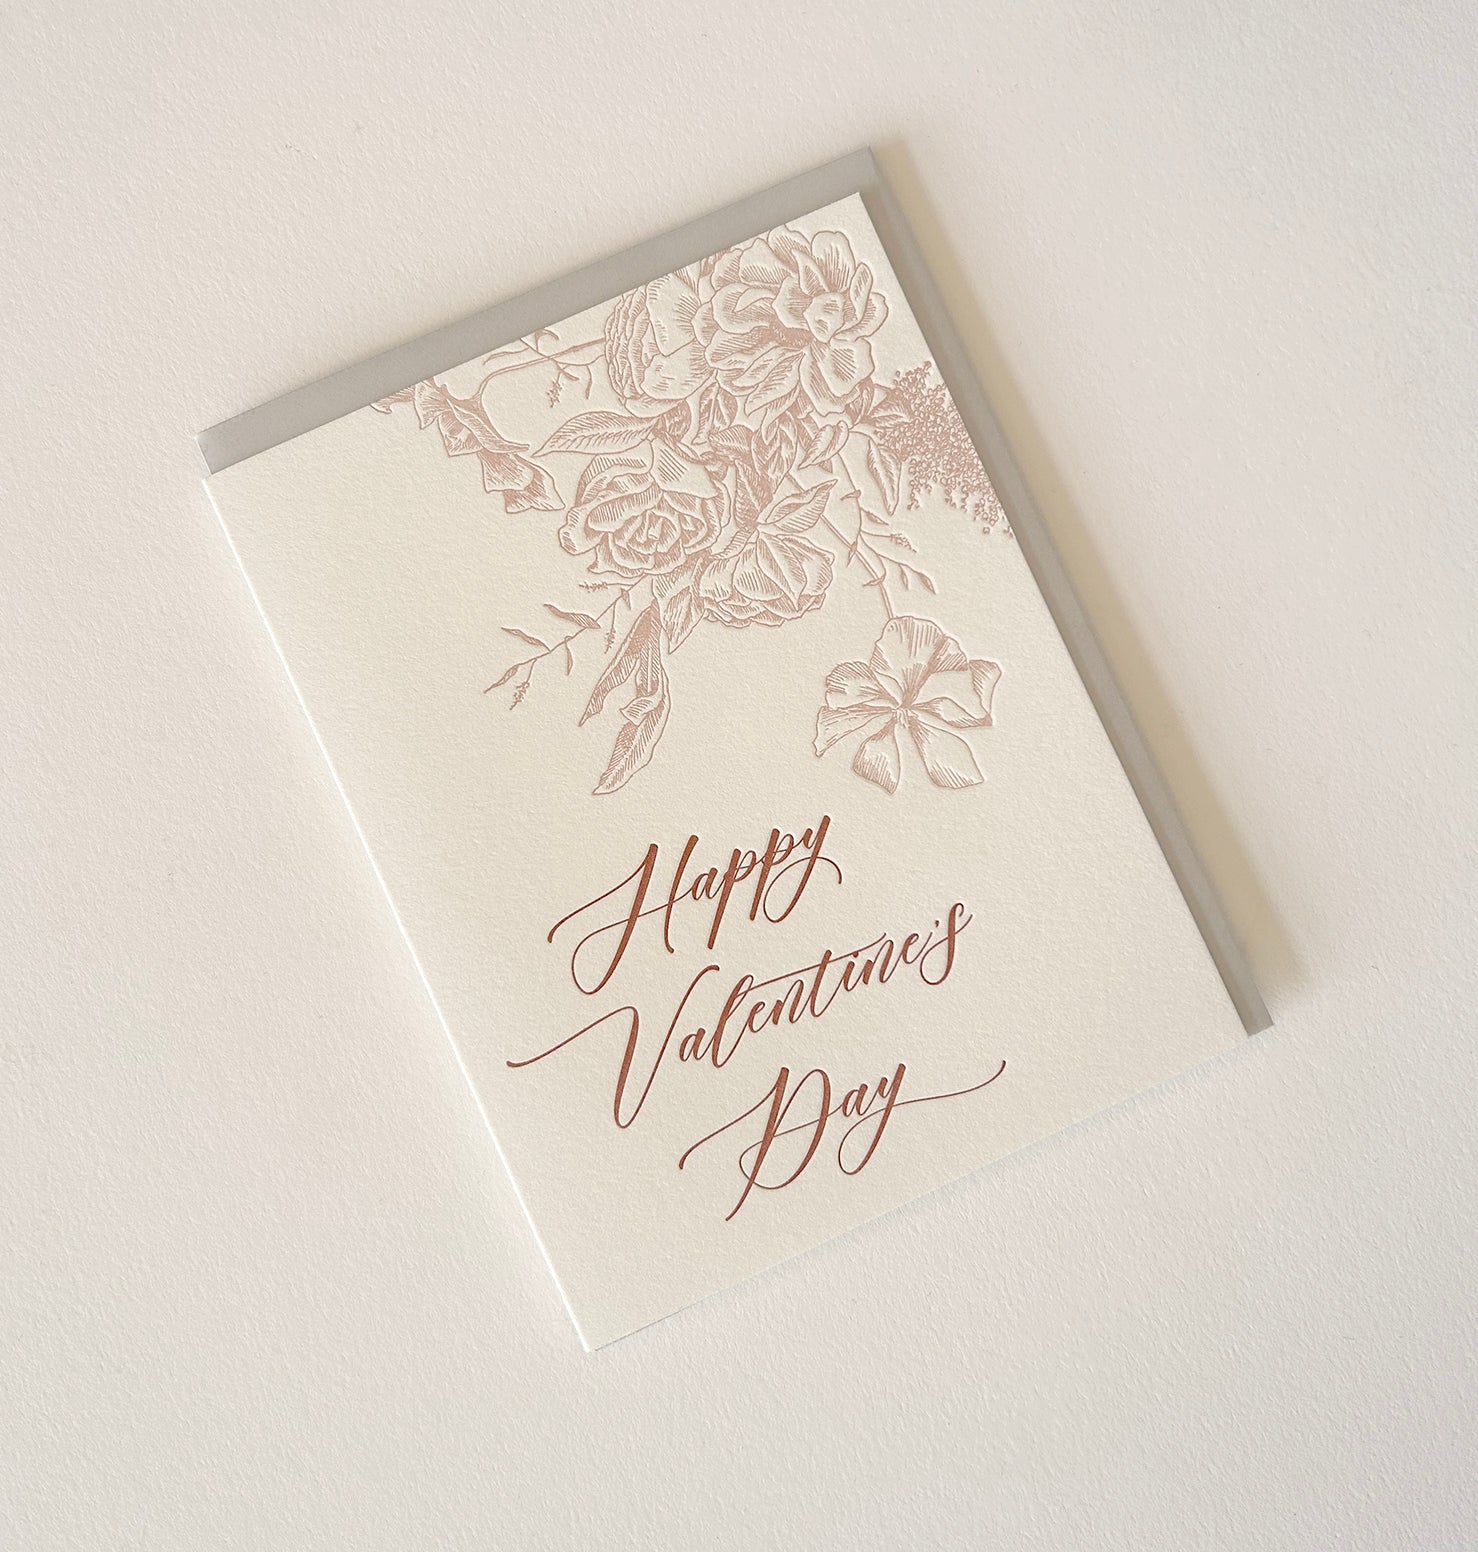 Letterpress love card with florals that says "Happy Valentine's Day" by Rust Belt Love